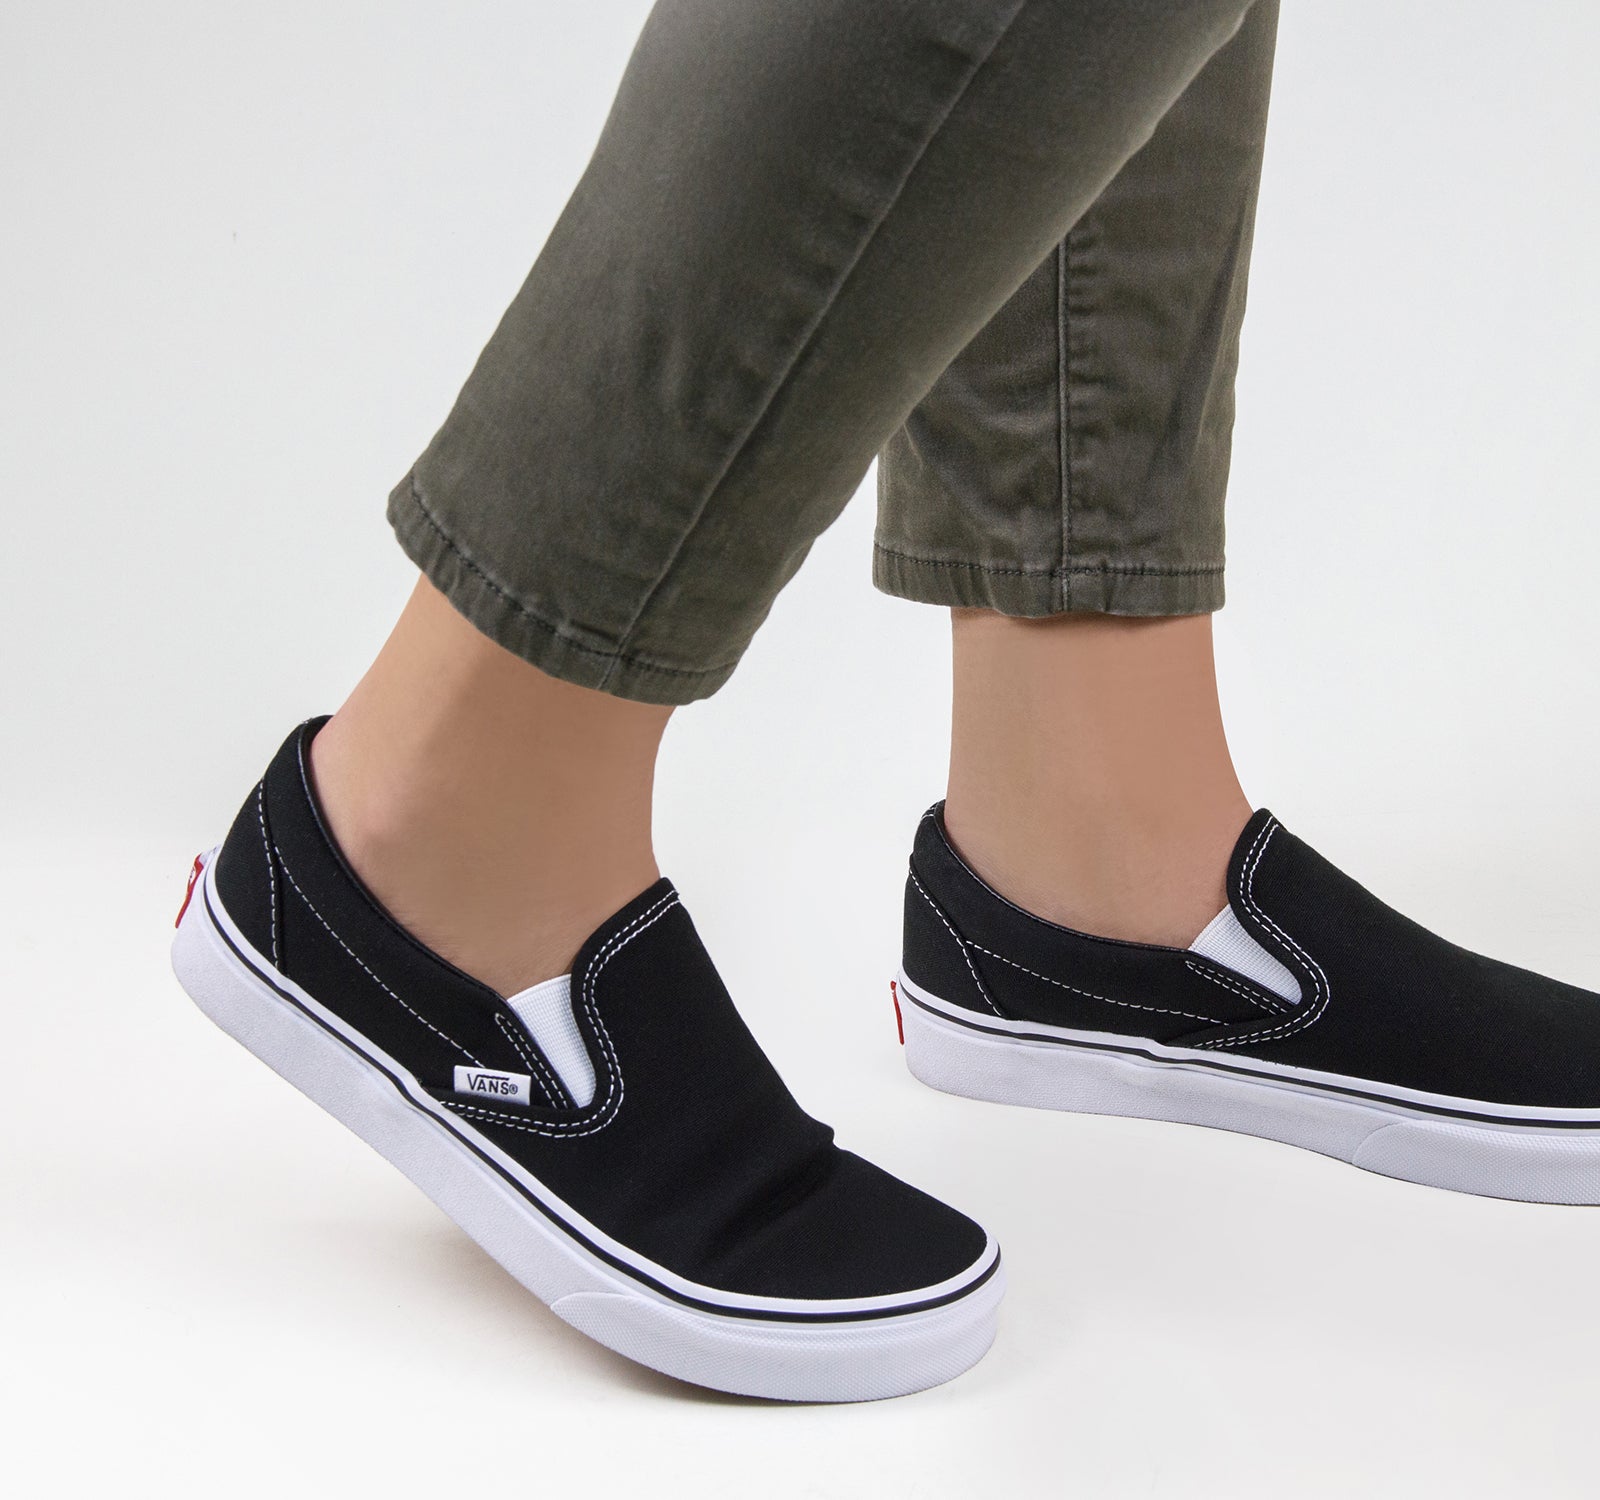 Vans Classic Slip-On Shoes– On The